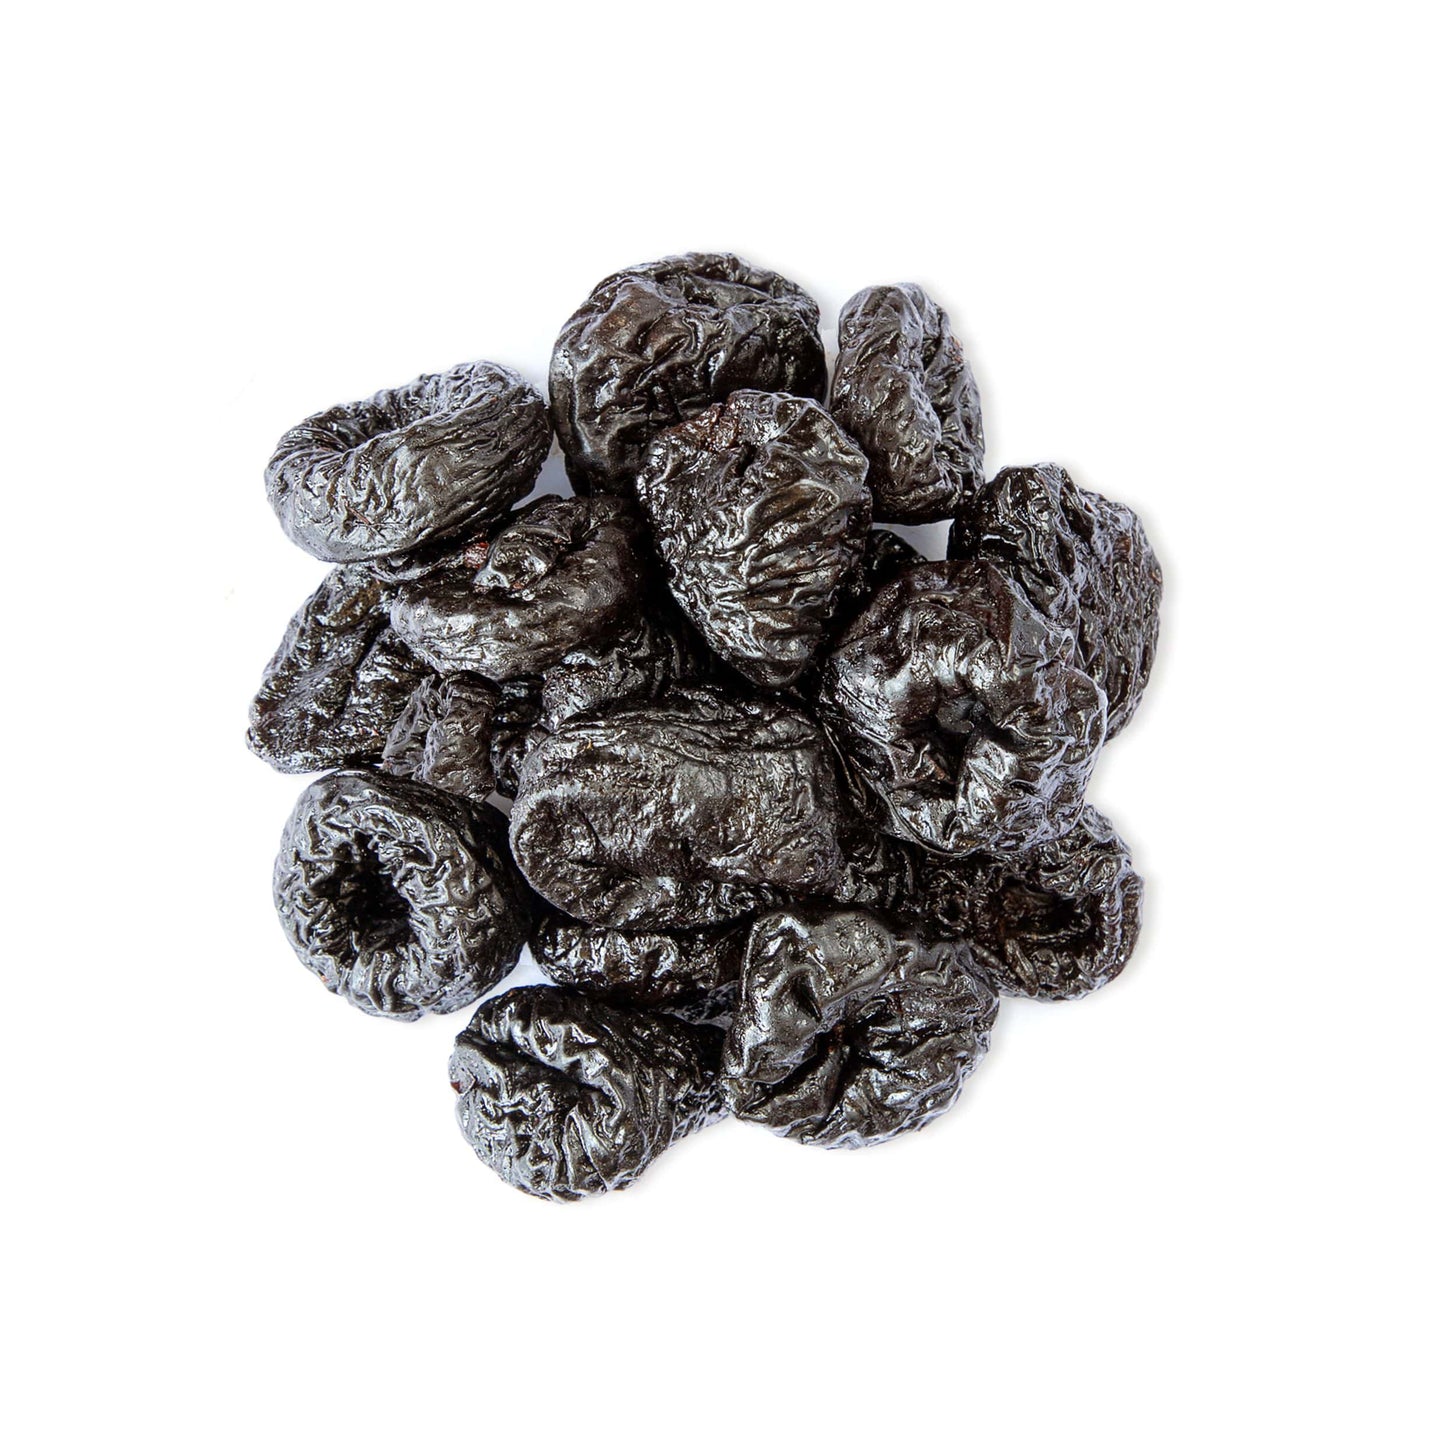 Pitted Prunes — Non-GMO Verified, Whole Dried Plums, Unsulfured, Unsweetened, Non-Infused, Non-Irradiated, Kosher, Vegan, Raw, Bulk - by Food to Live